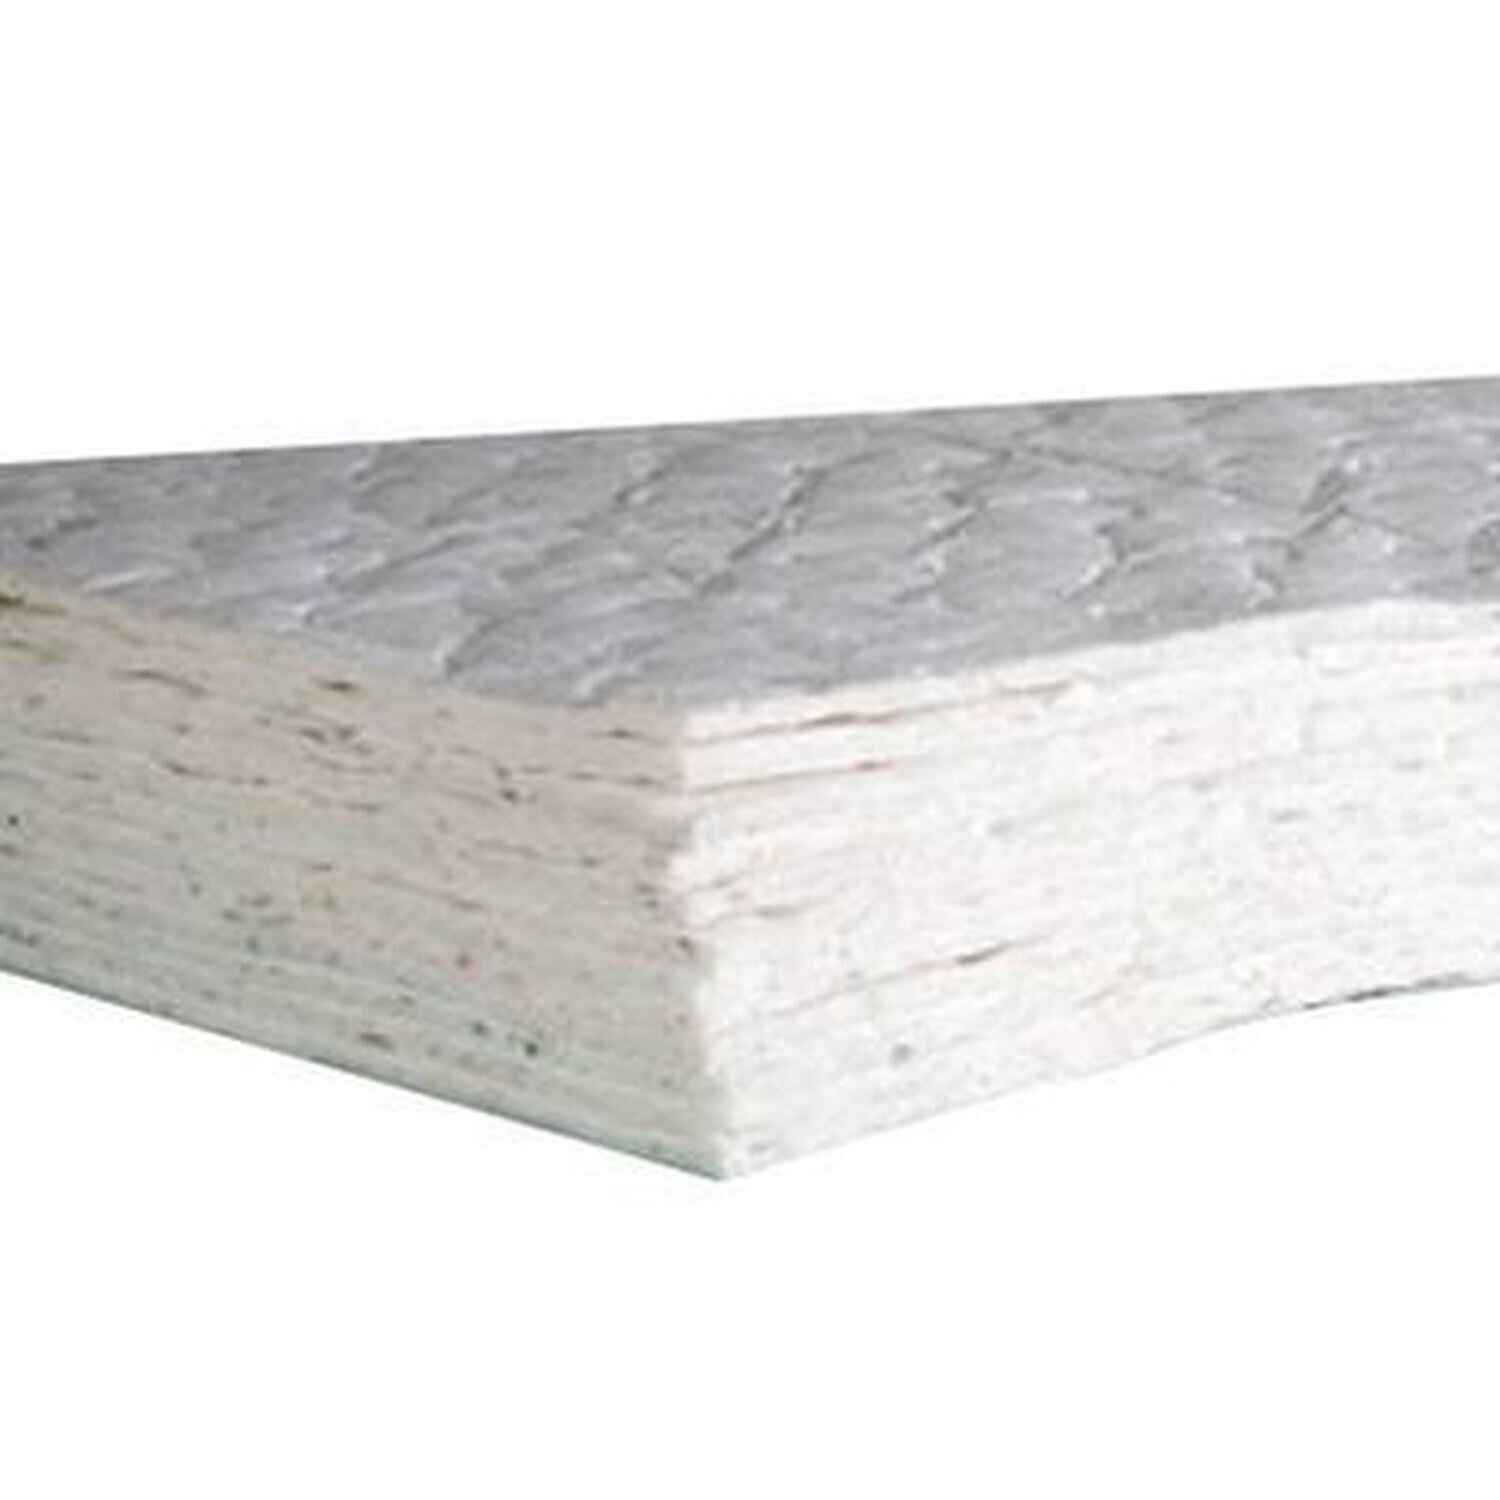 Oil Absorbent Pad Heavy Duty 400gsm Pack of 5